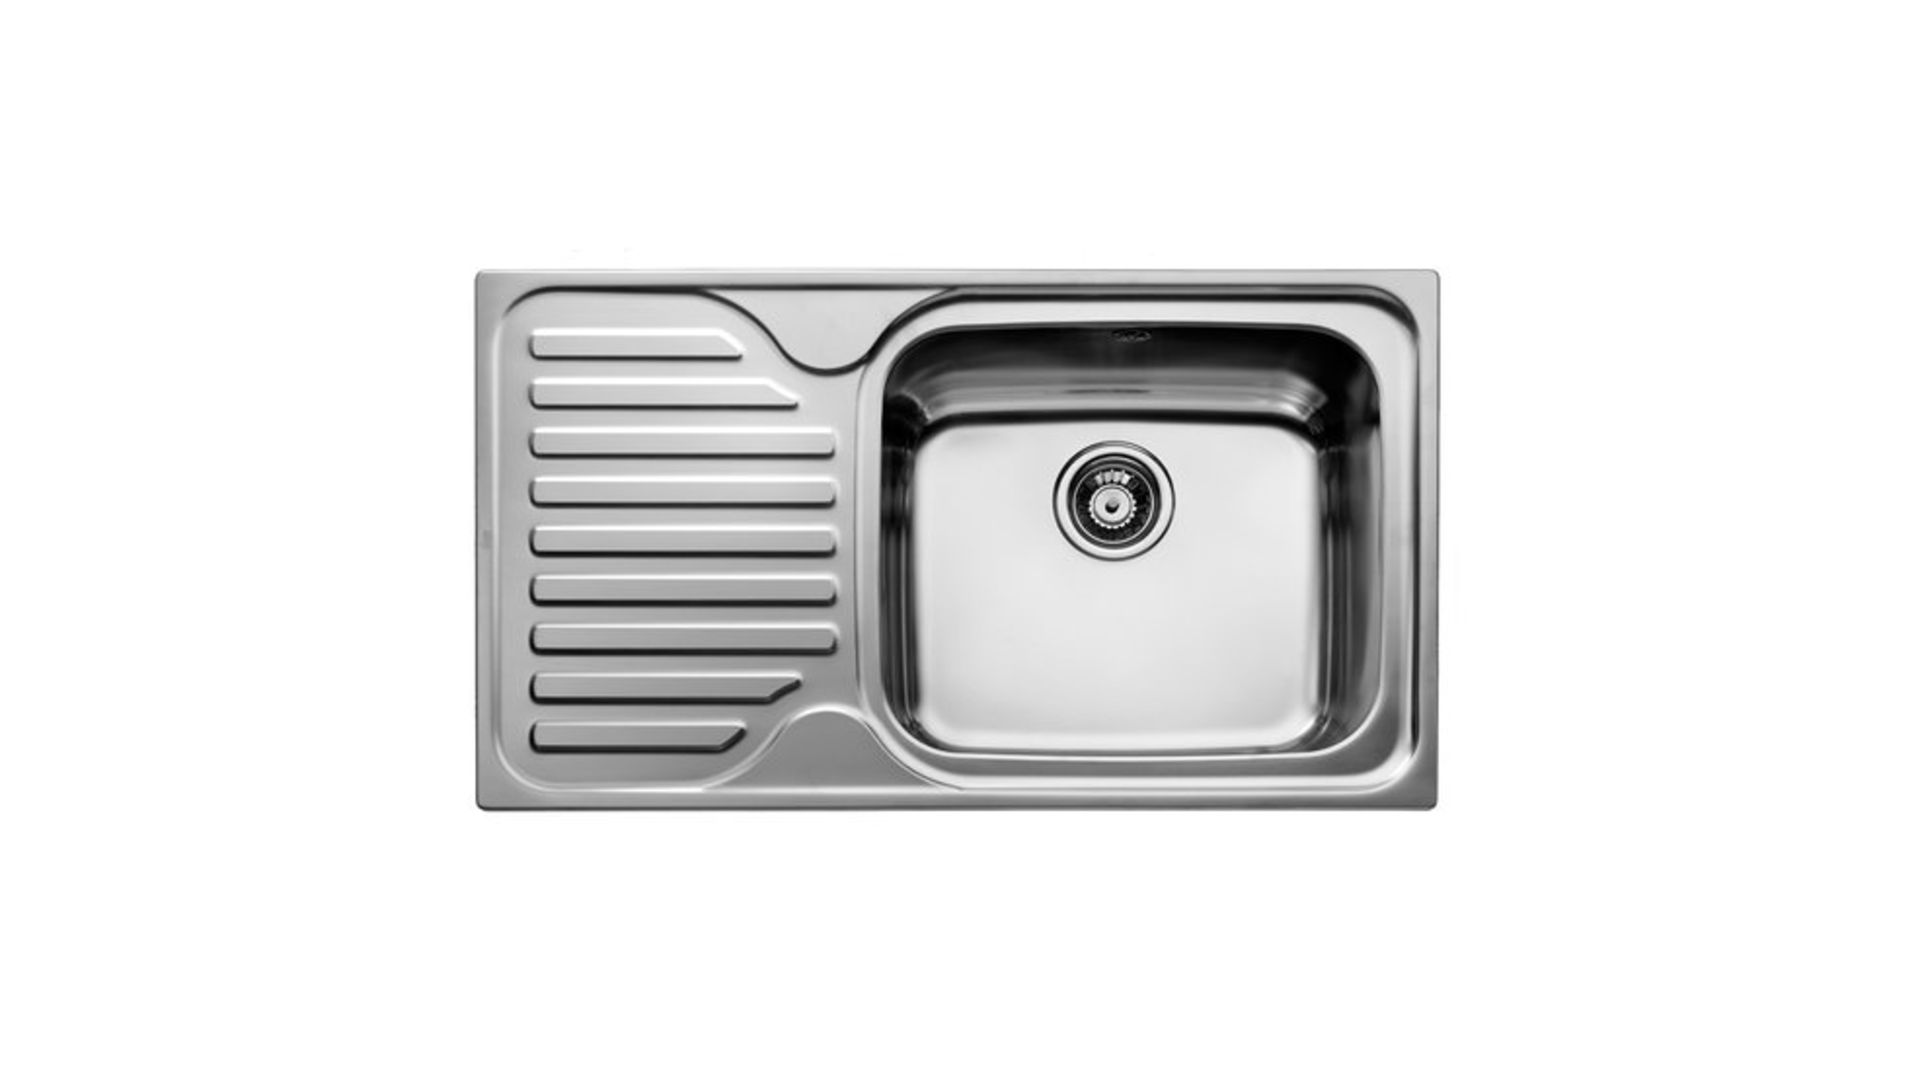 New (P25) Inset Stainless Steel Sink With One Bowl And One Drainer (Left Hand). Inset Sink, One... - Image 2 of 3